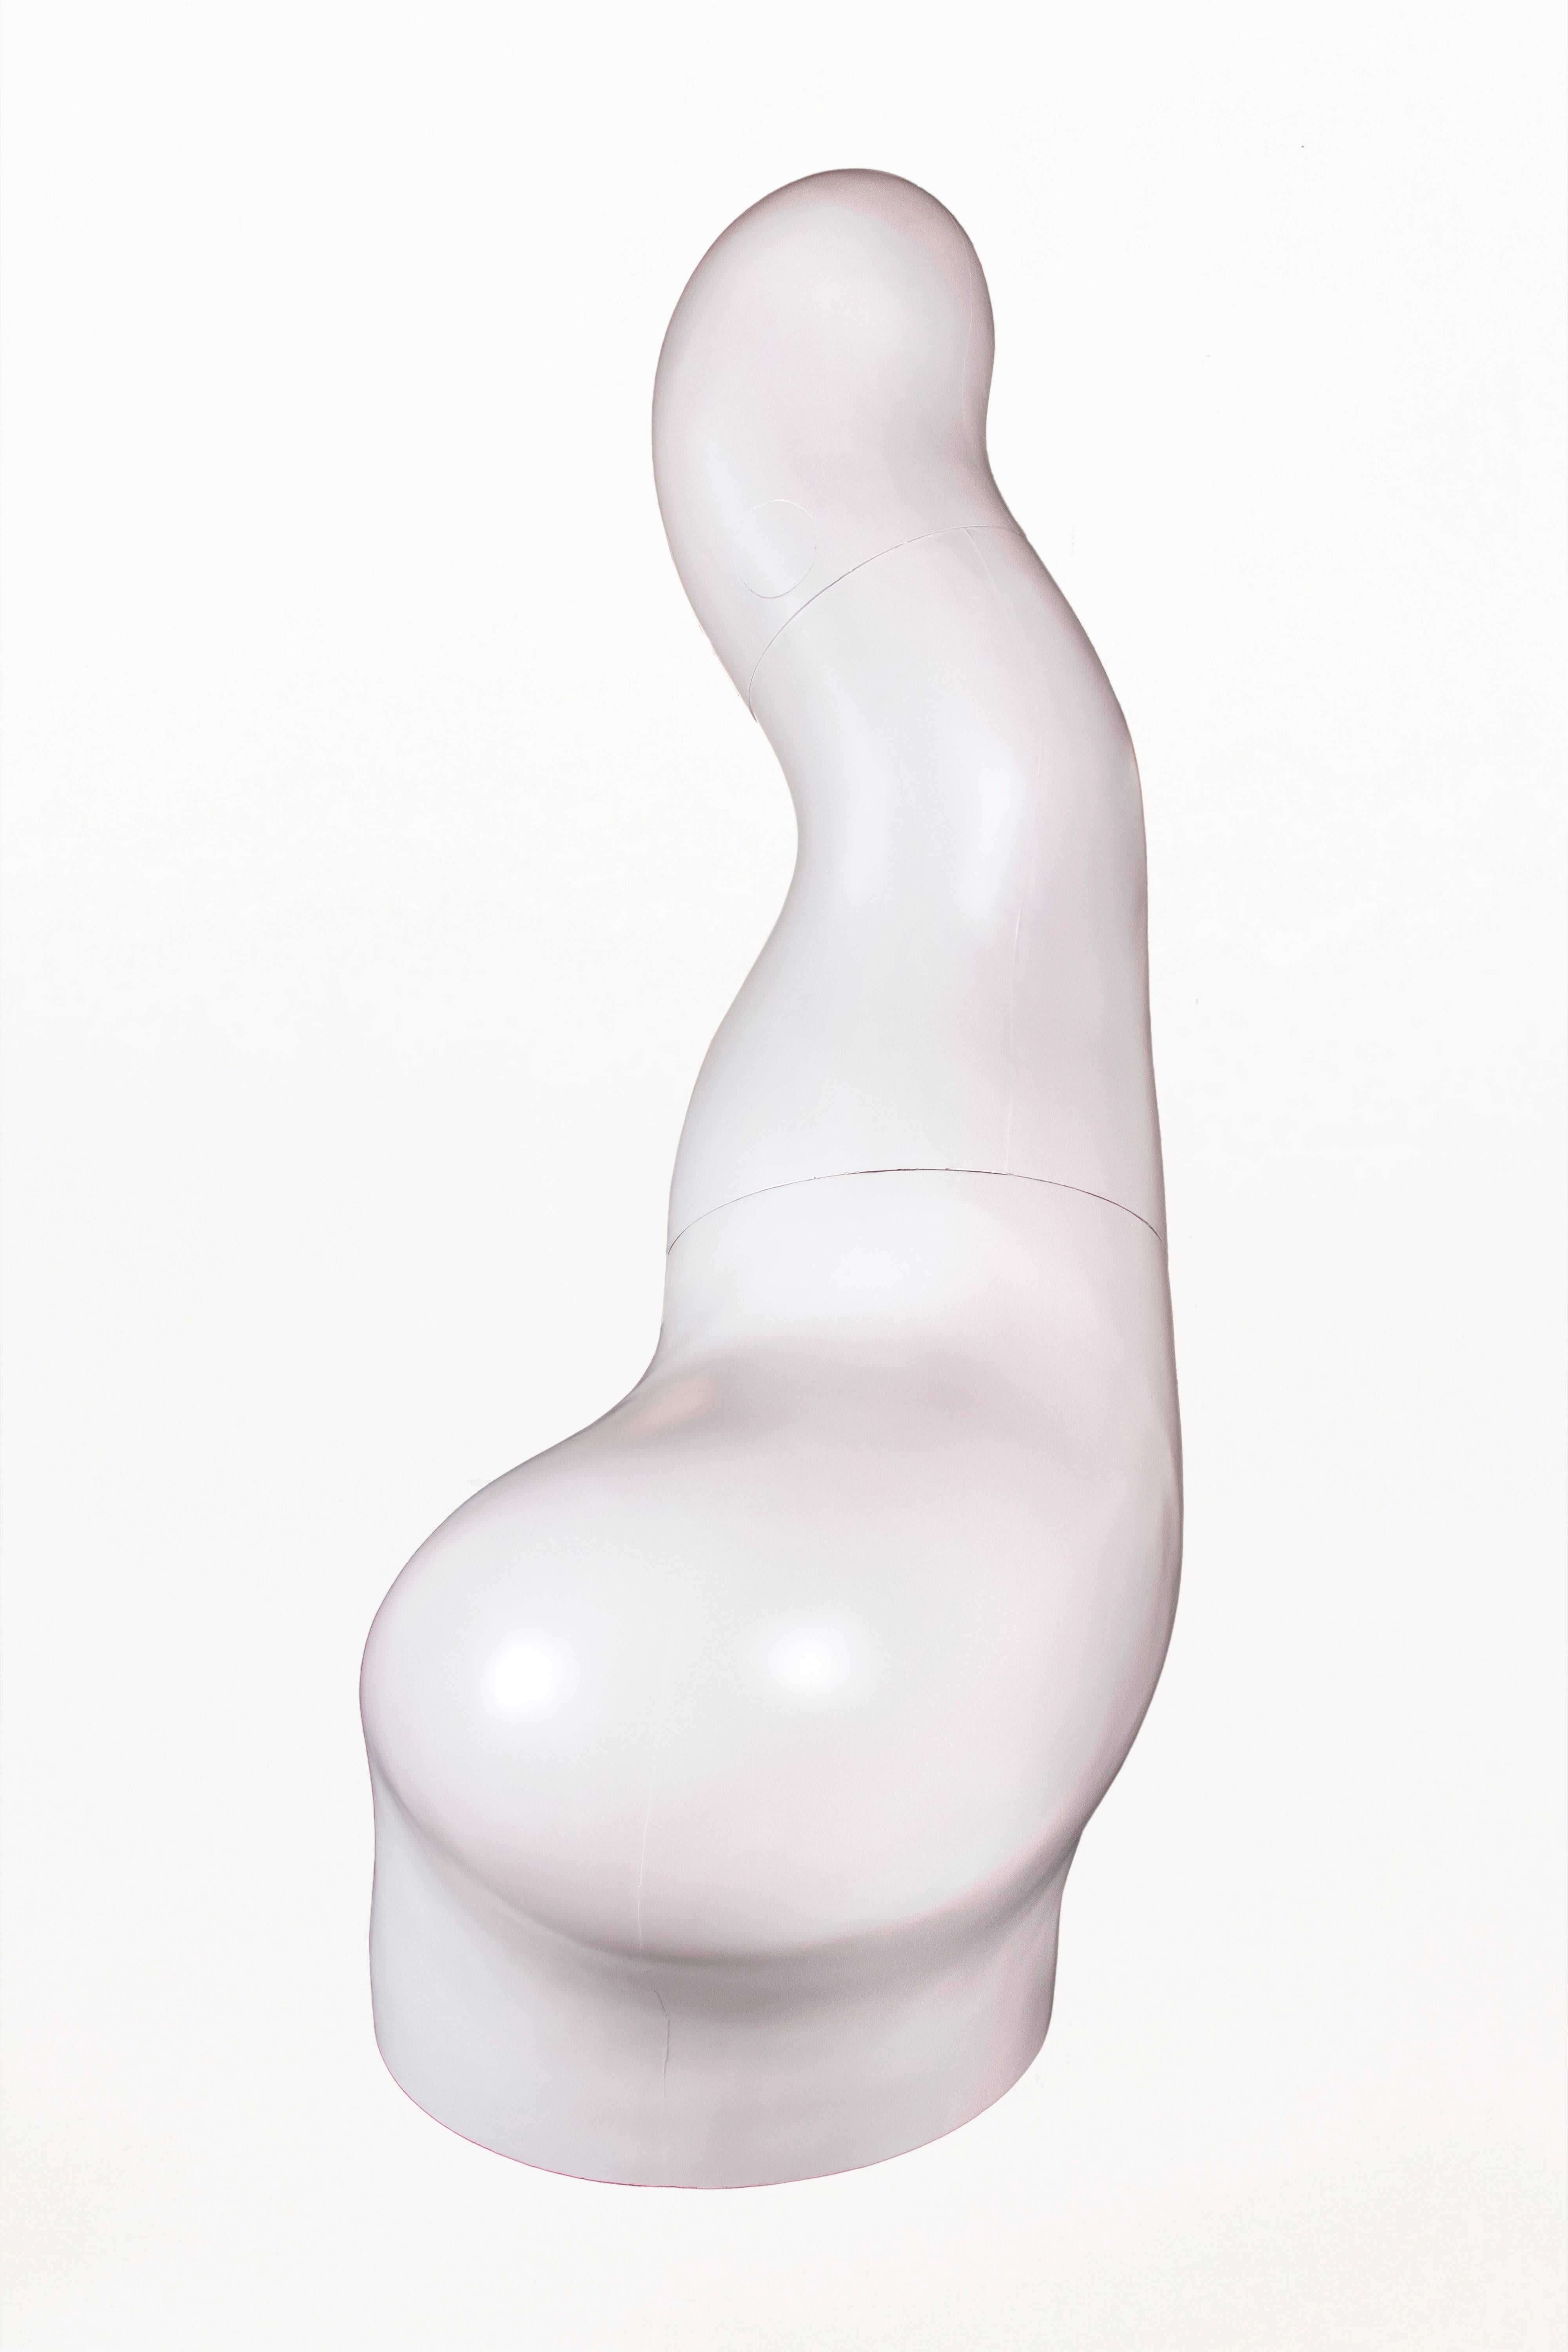 French White Lacquered Polymorphic Sculpture by Les Simonnet, circa 1968, France